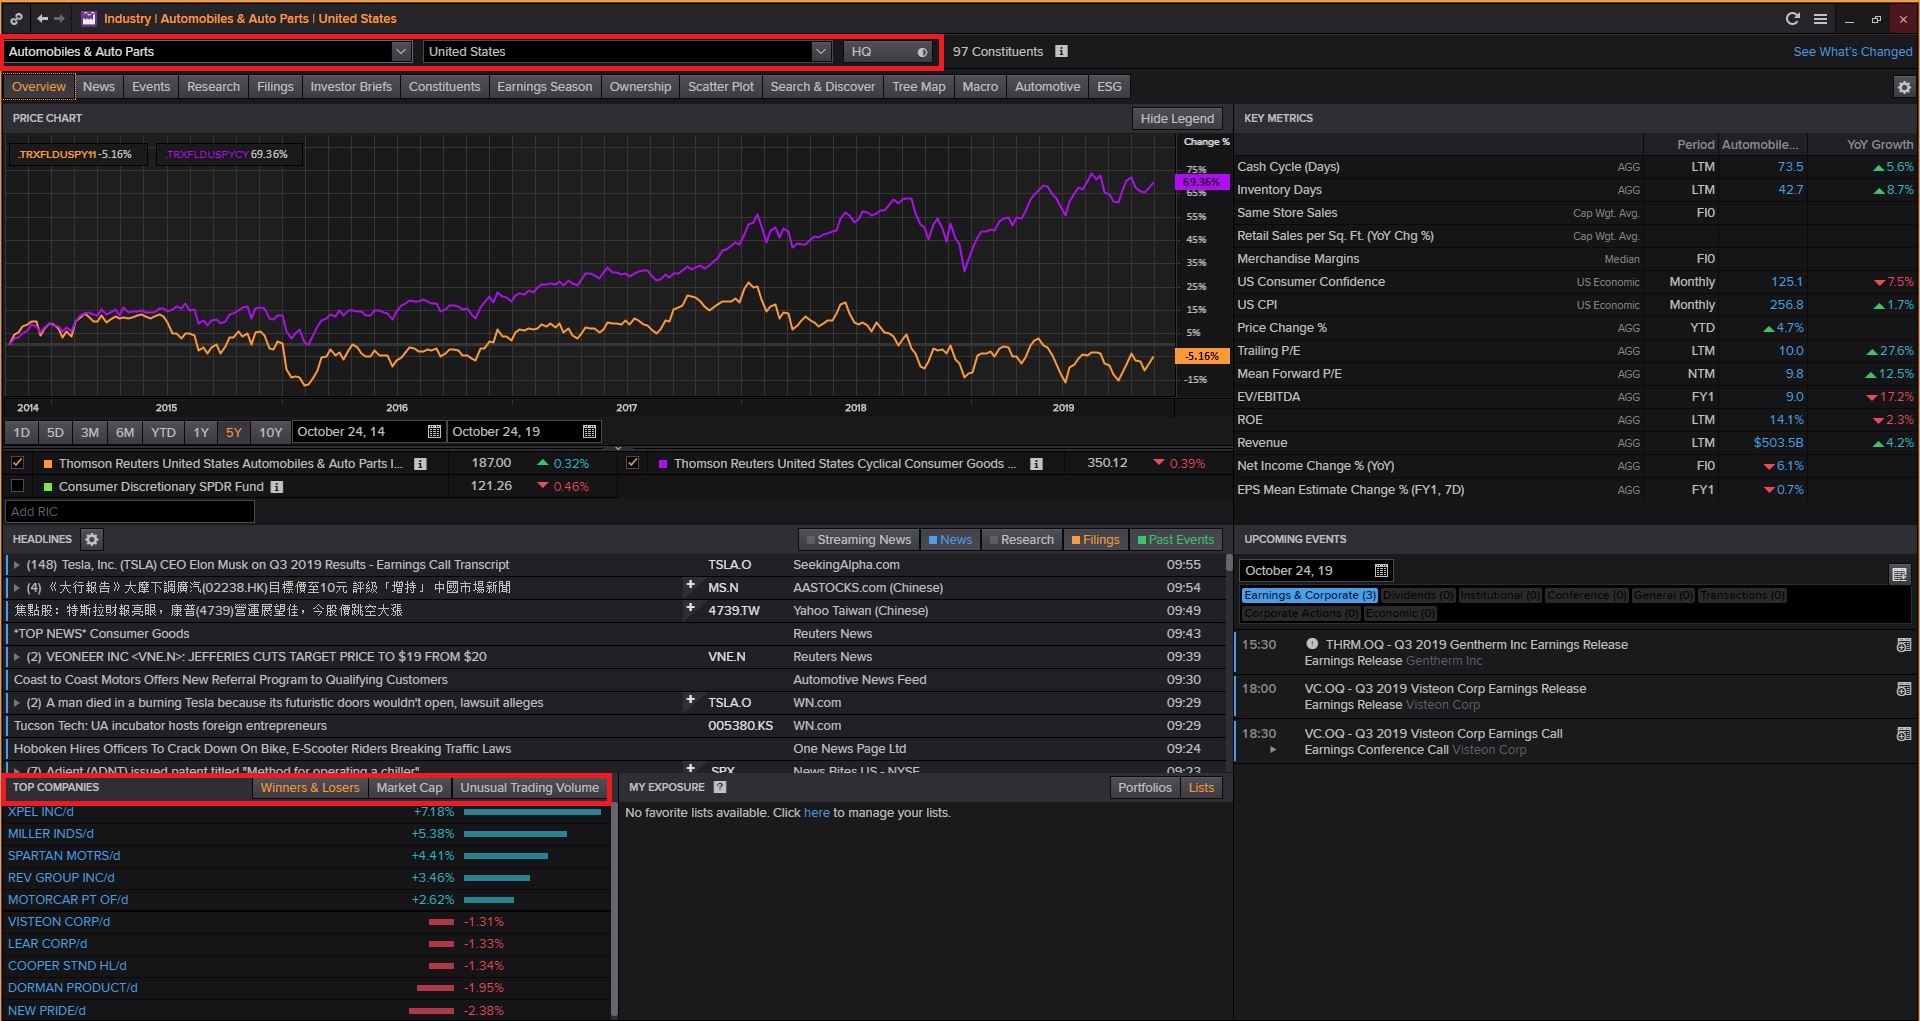 Login to Thomson Reuters Eikon (Available Only in Library) then Type INDUS and Search and Select Consumer Cyclicals and Click on Automobiles & Auto Parts and Select Country and Click on Top Companies